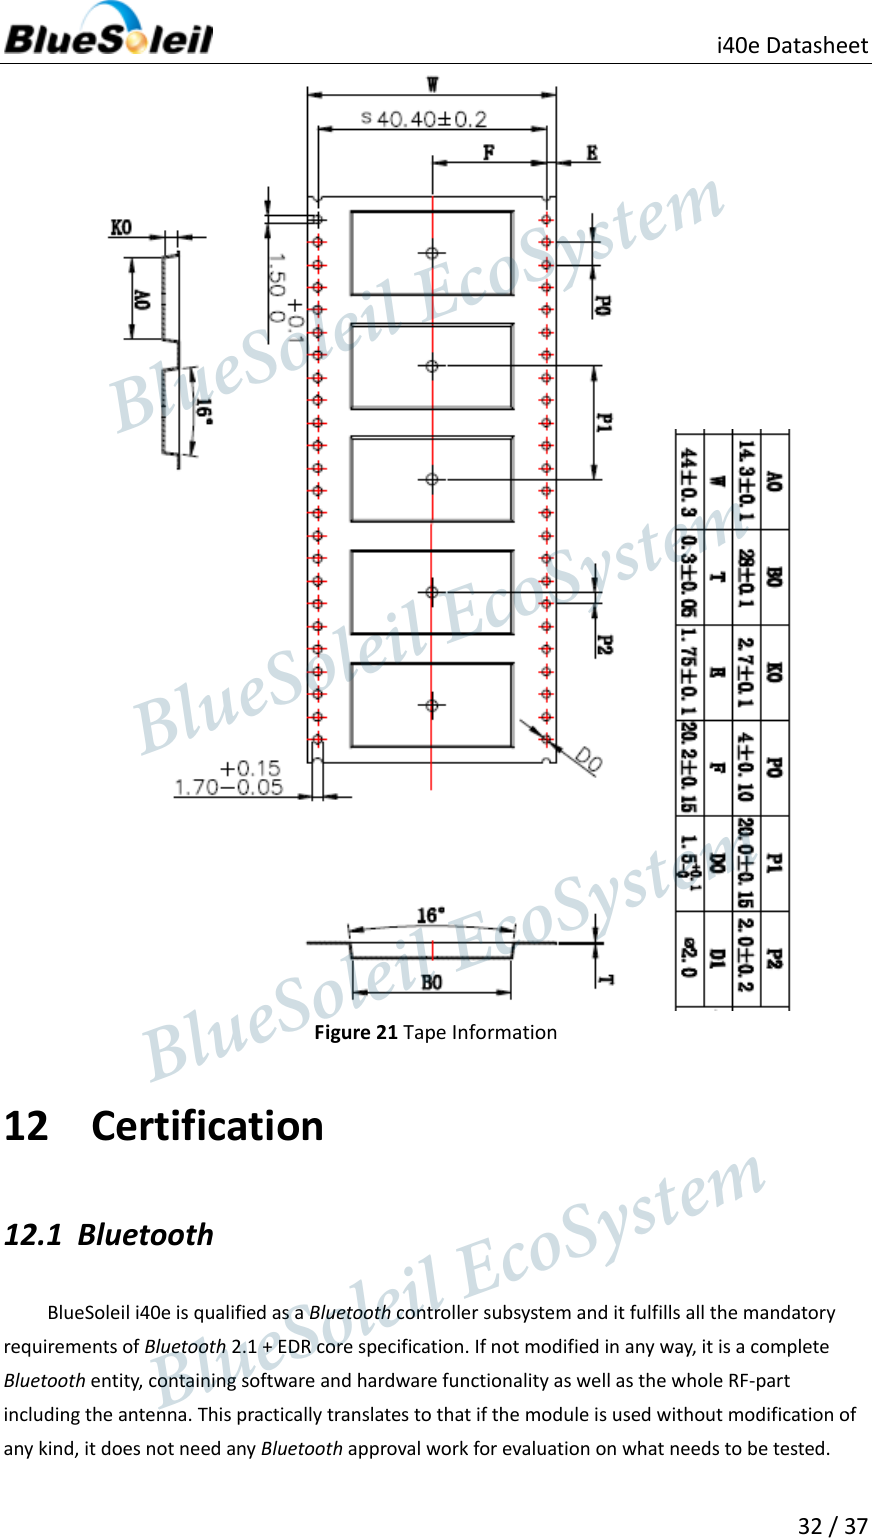                          i40e Datasheet  32 / 37   Figure 21 Tape Information 12 Certification 12.1 Bluetooth BlueSoleil i40e is qualified as a Bluetooth controller subsystem and it fulfills all the mandatory requirements of Bluetooth 2.1 + EDR core specification. If not modified in any way, it is a complete Bluetooth entity, containing software and hardware functionality as well as the whole RF-part including the antenna. This practically translates to that if the module is used without modification of any kind, it does not need any Bluetooth approval work for evaluation on what needs to be tested.                  BlueSoleil EcoSystem            BlueSoleil EcoSystem      BlueSoleil EcoSystemBlueSoleil EcoSystem